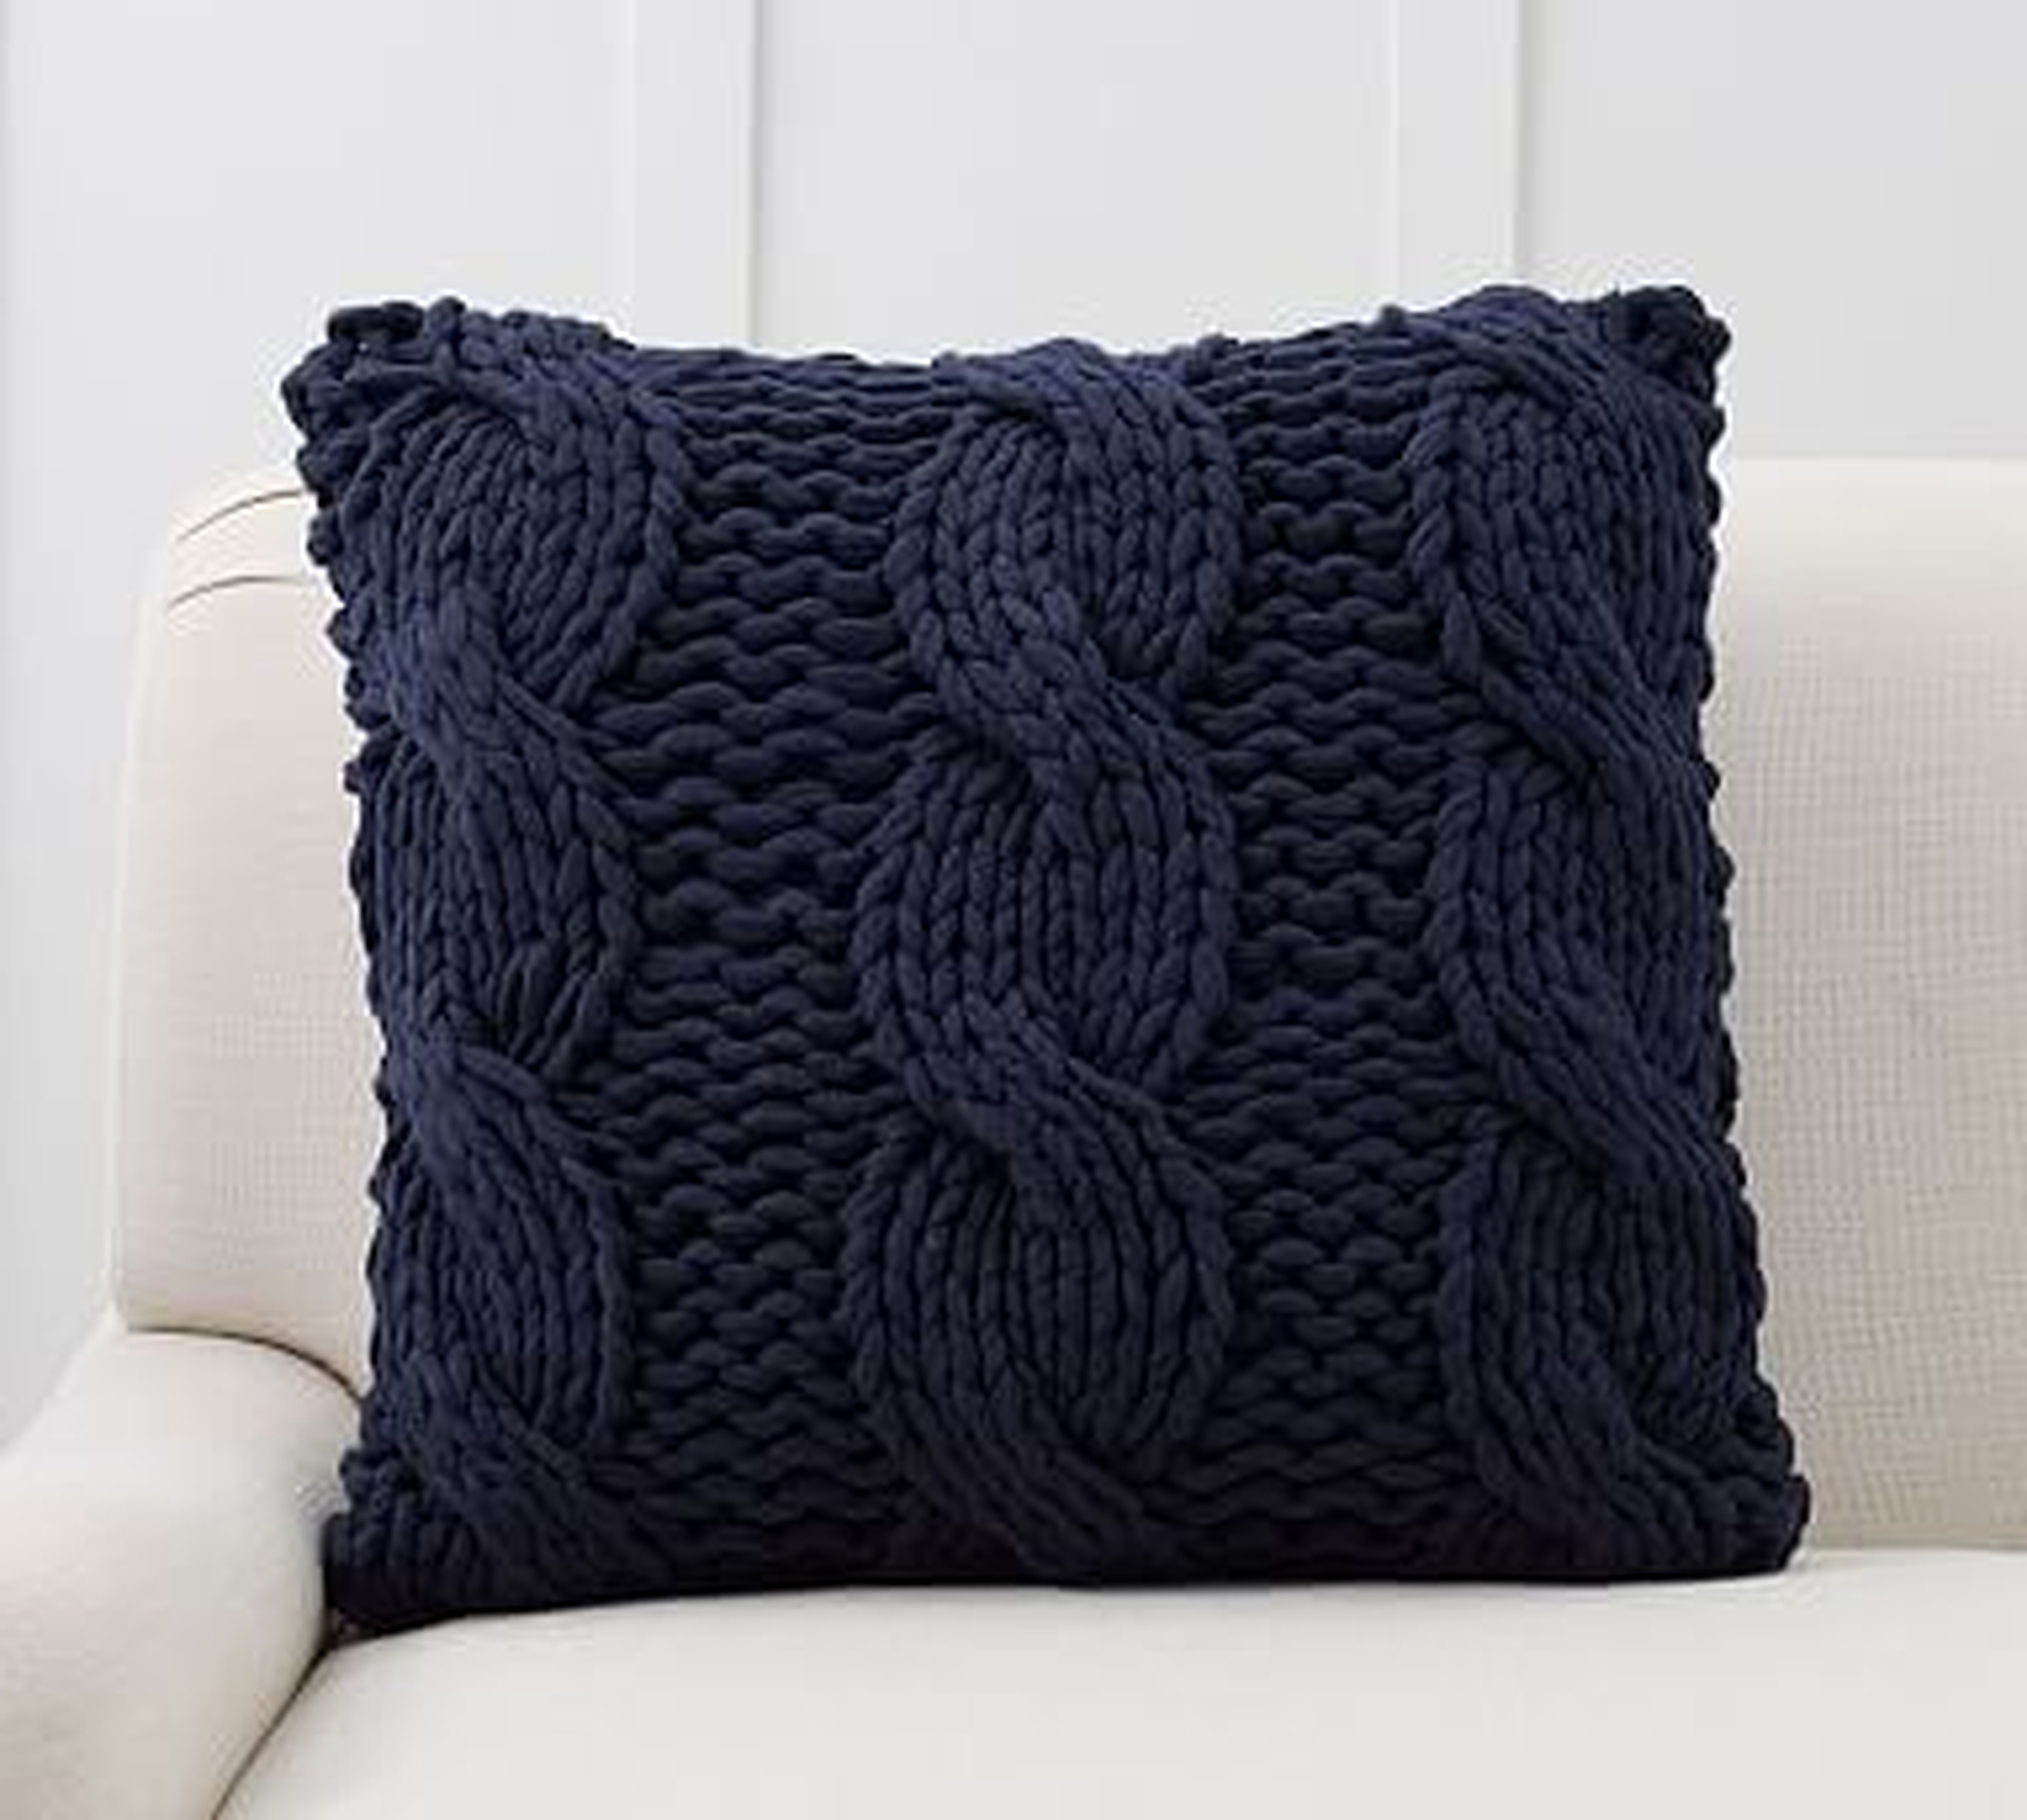 Colossal Handknit Pillow Cover, 24", Navy - Pottery Barn